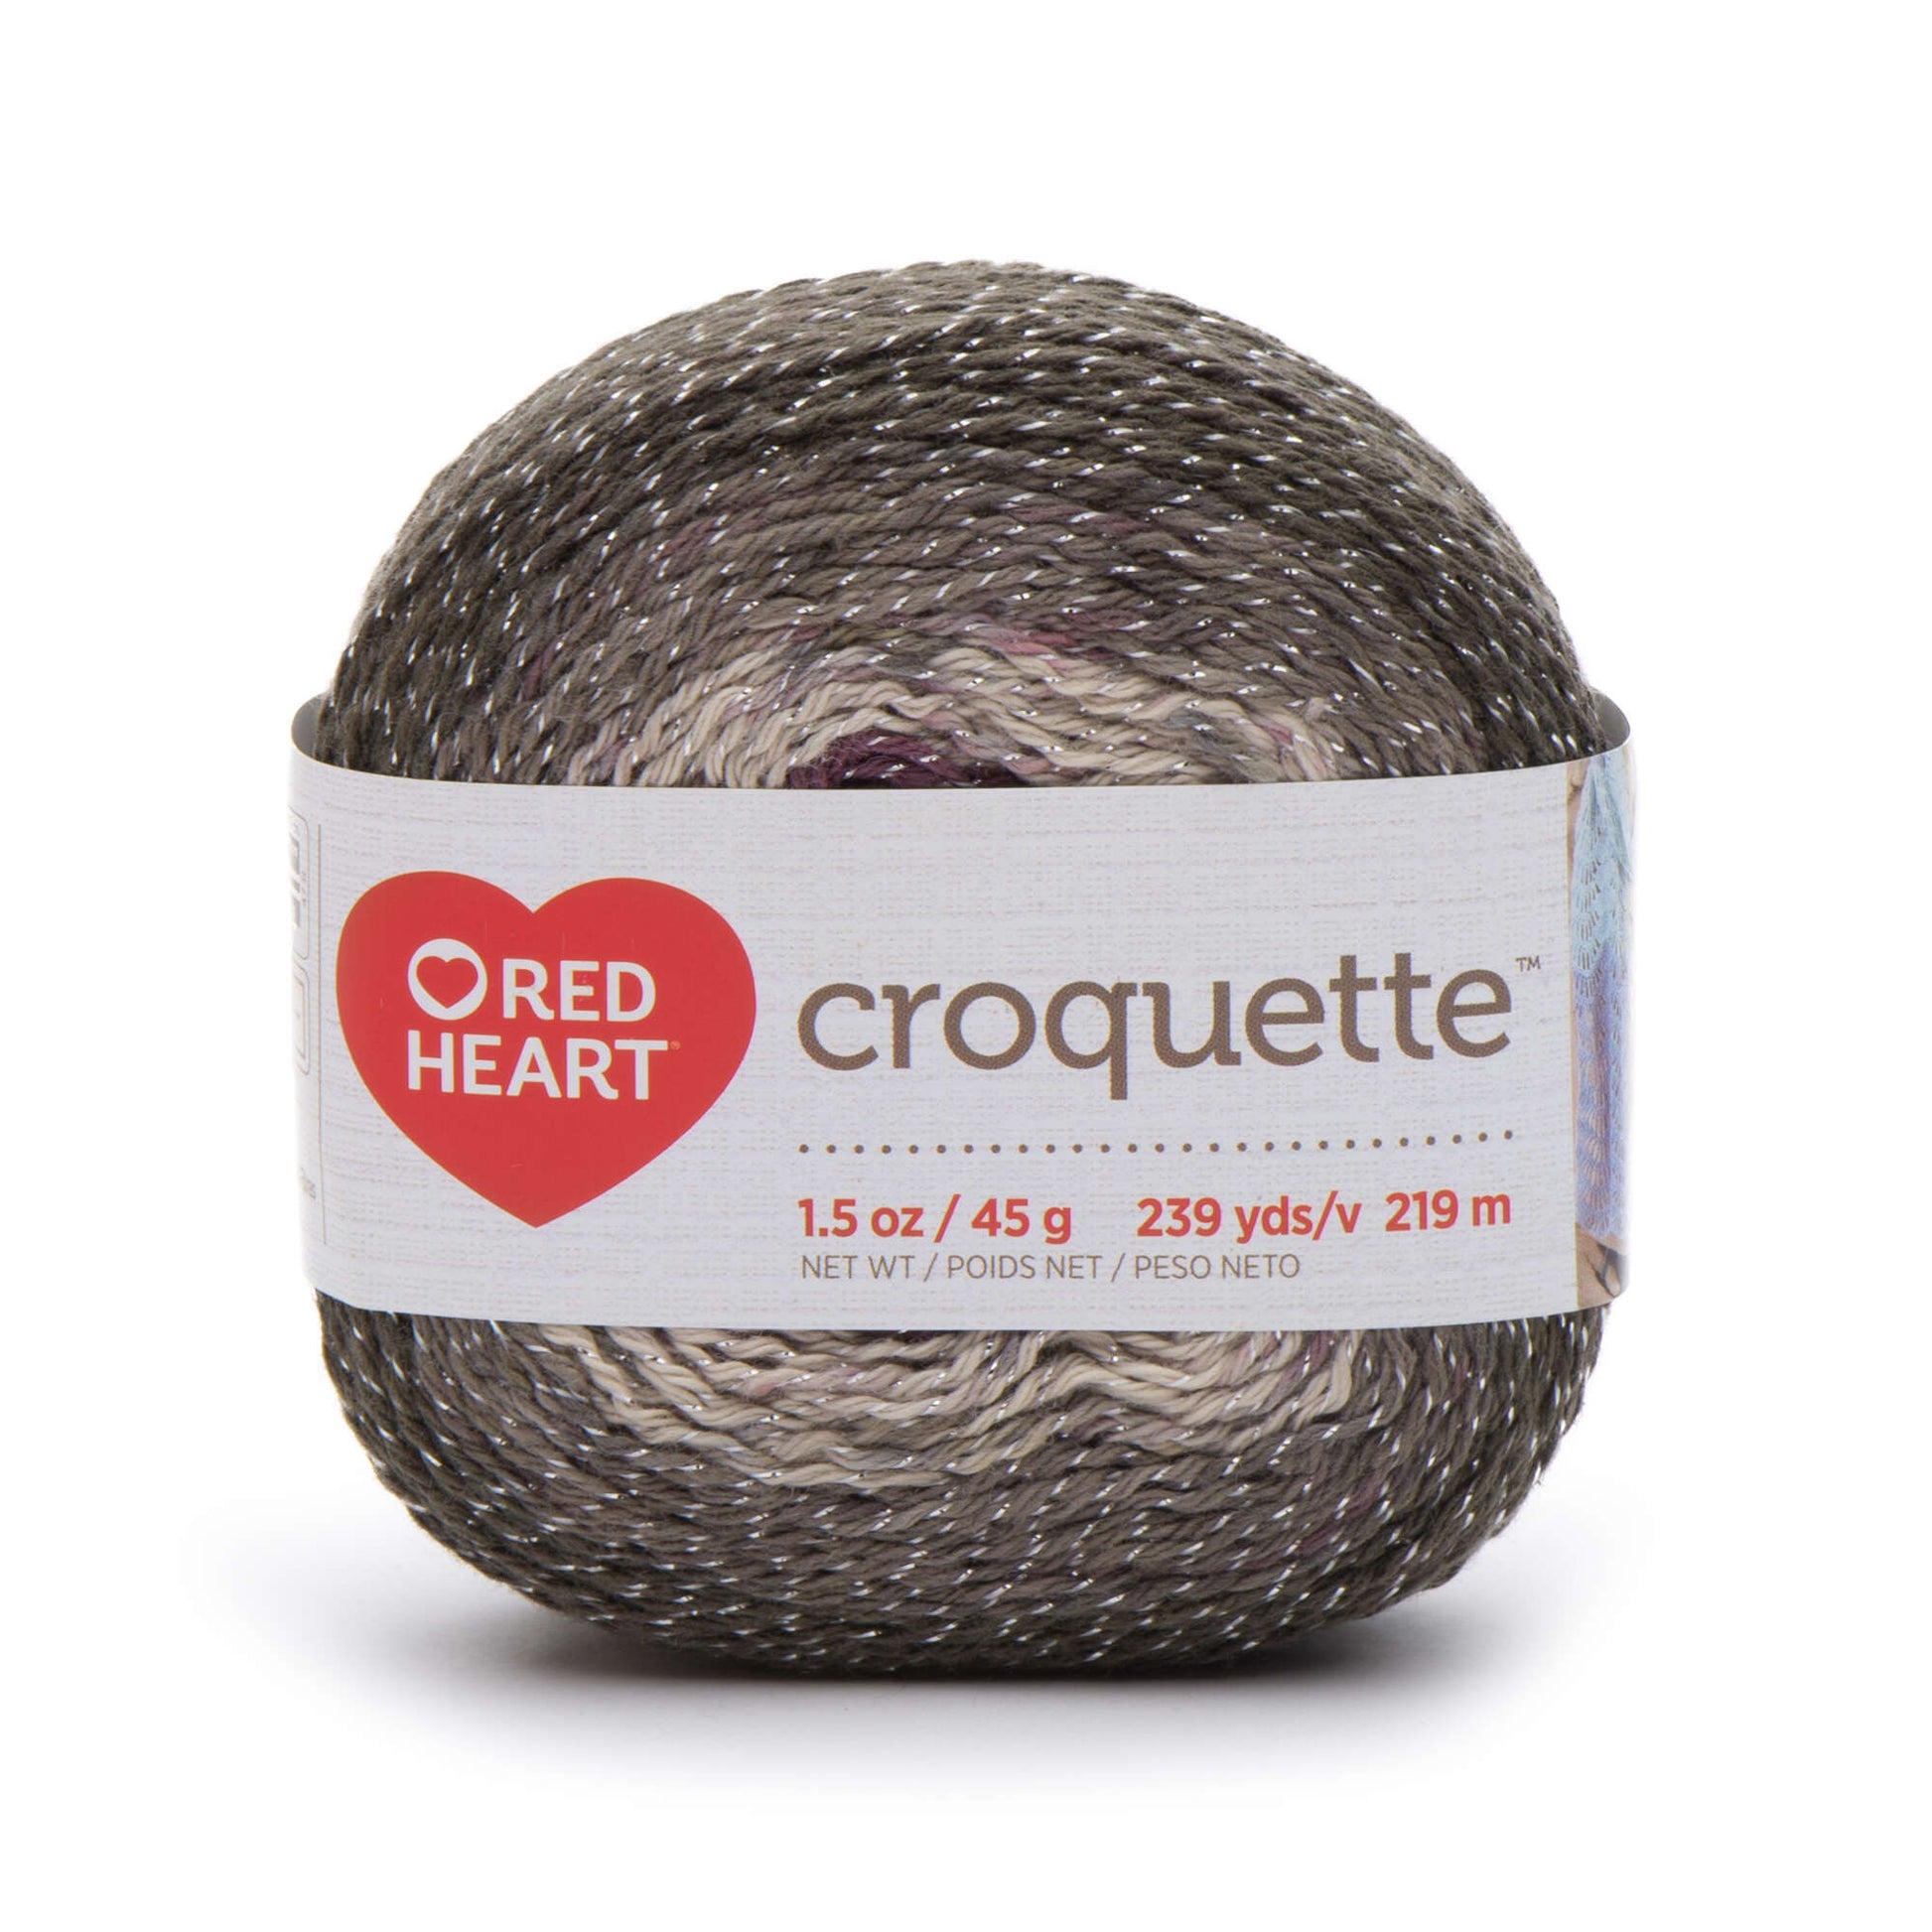 Red Heart Croquette Yarn - Clearance shades Revenge